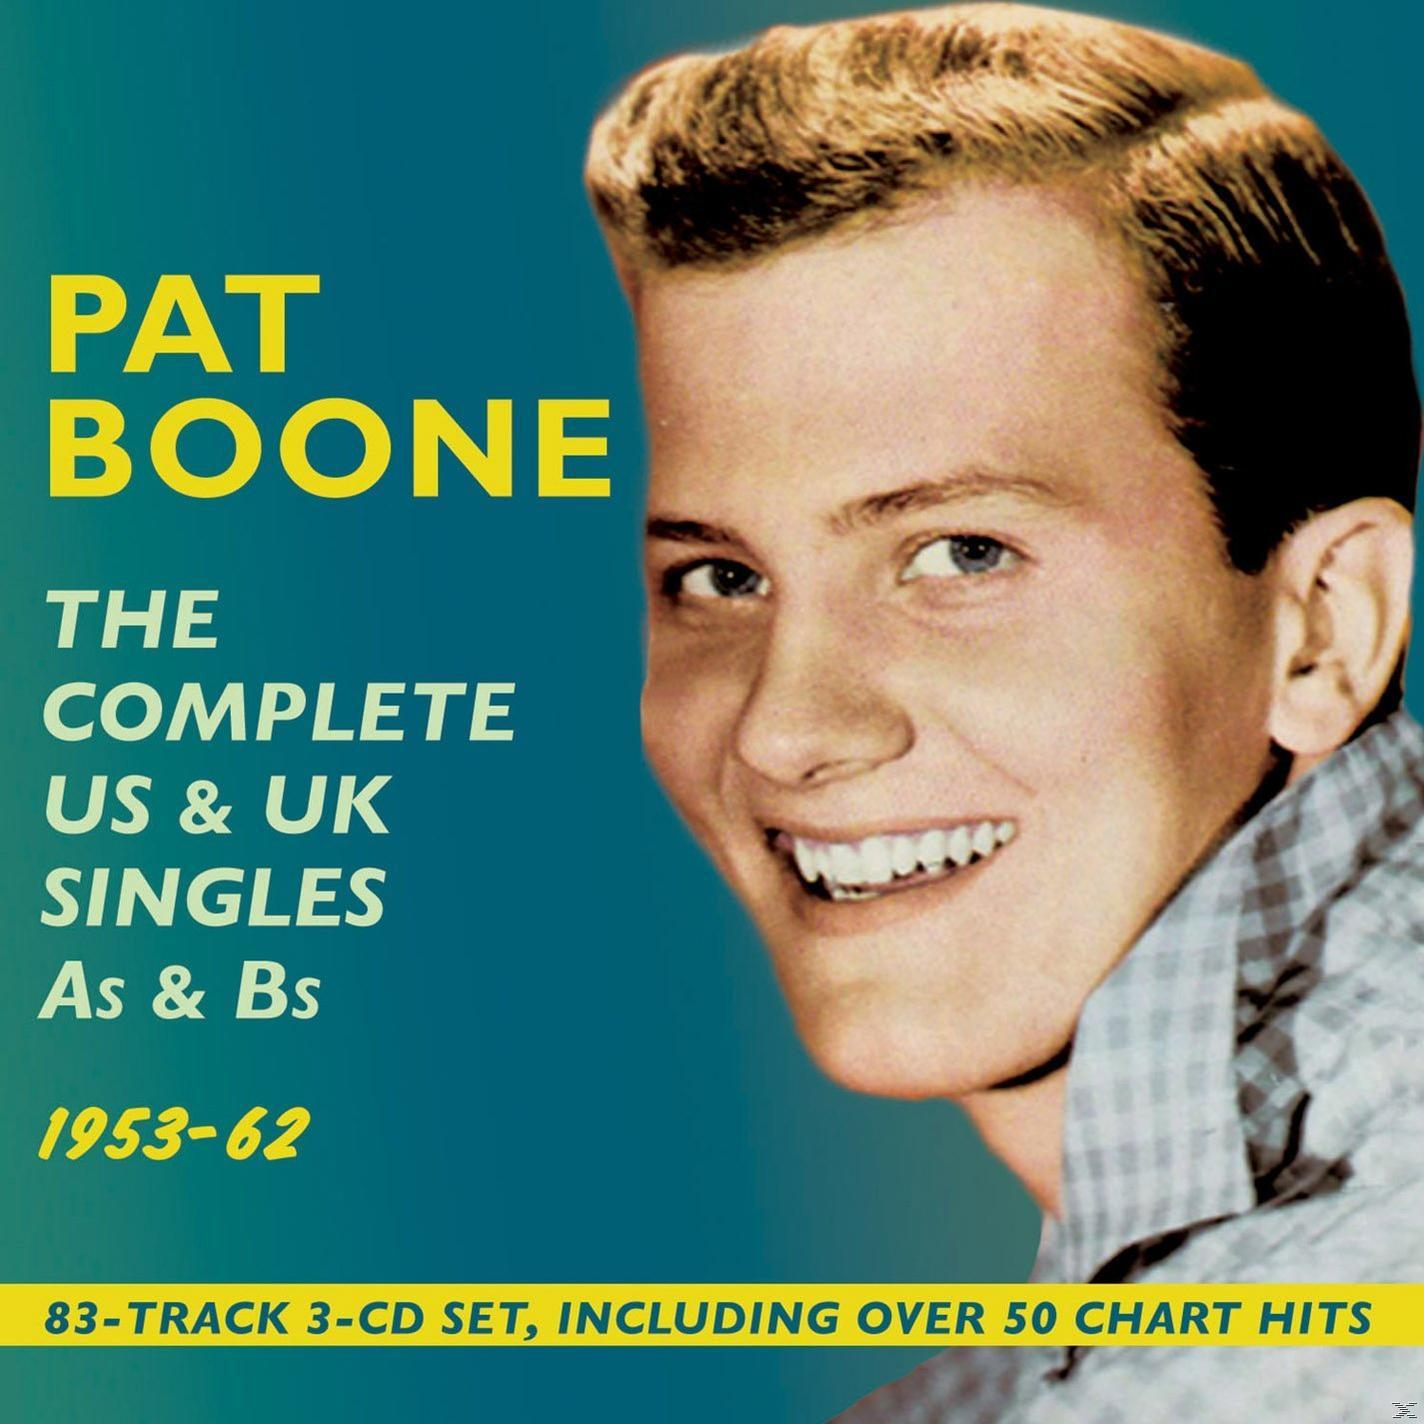 Pat Boone - Singles Bs & Us The Complete (CD) 1953-62 As Uk & 